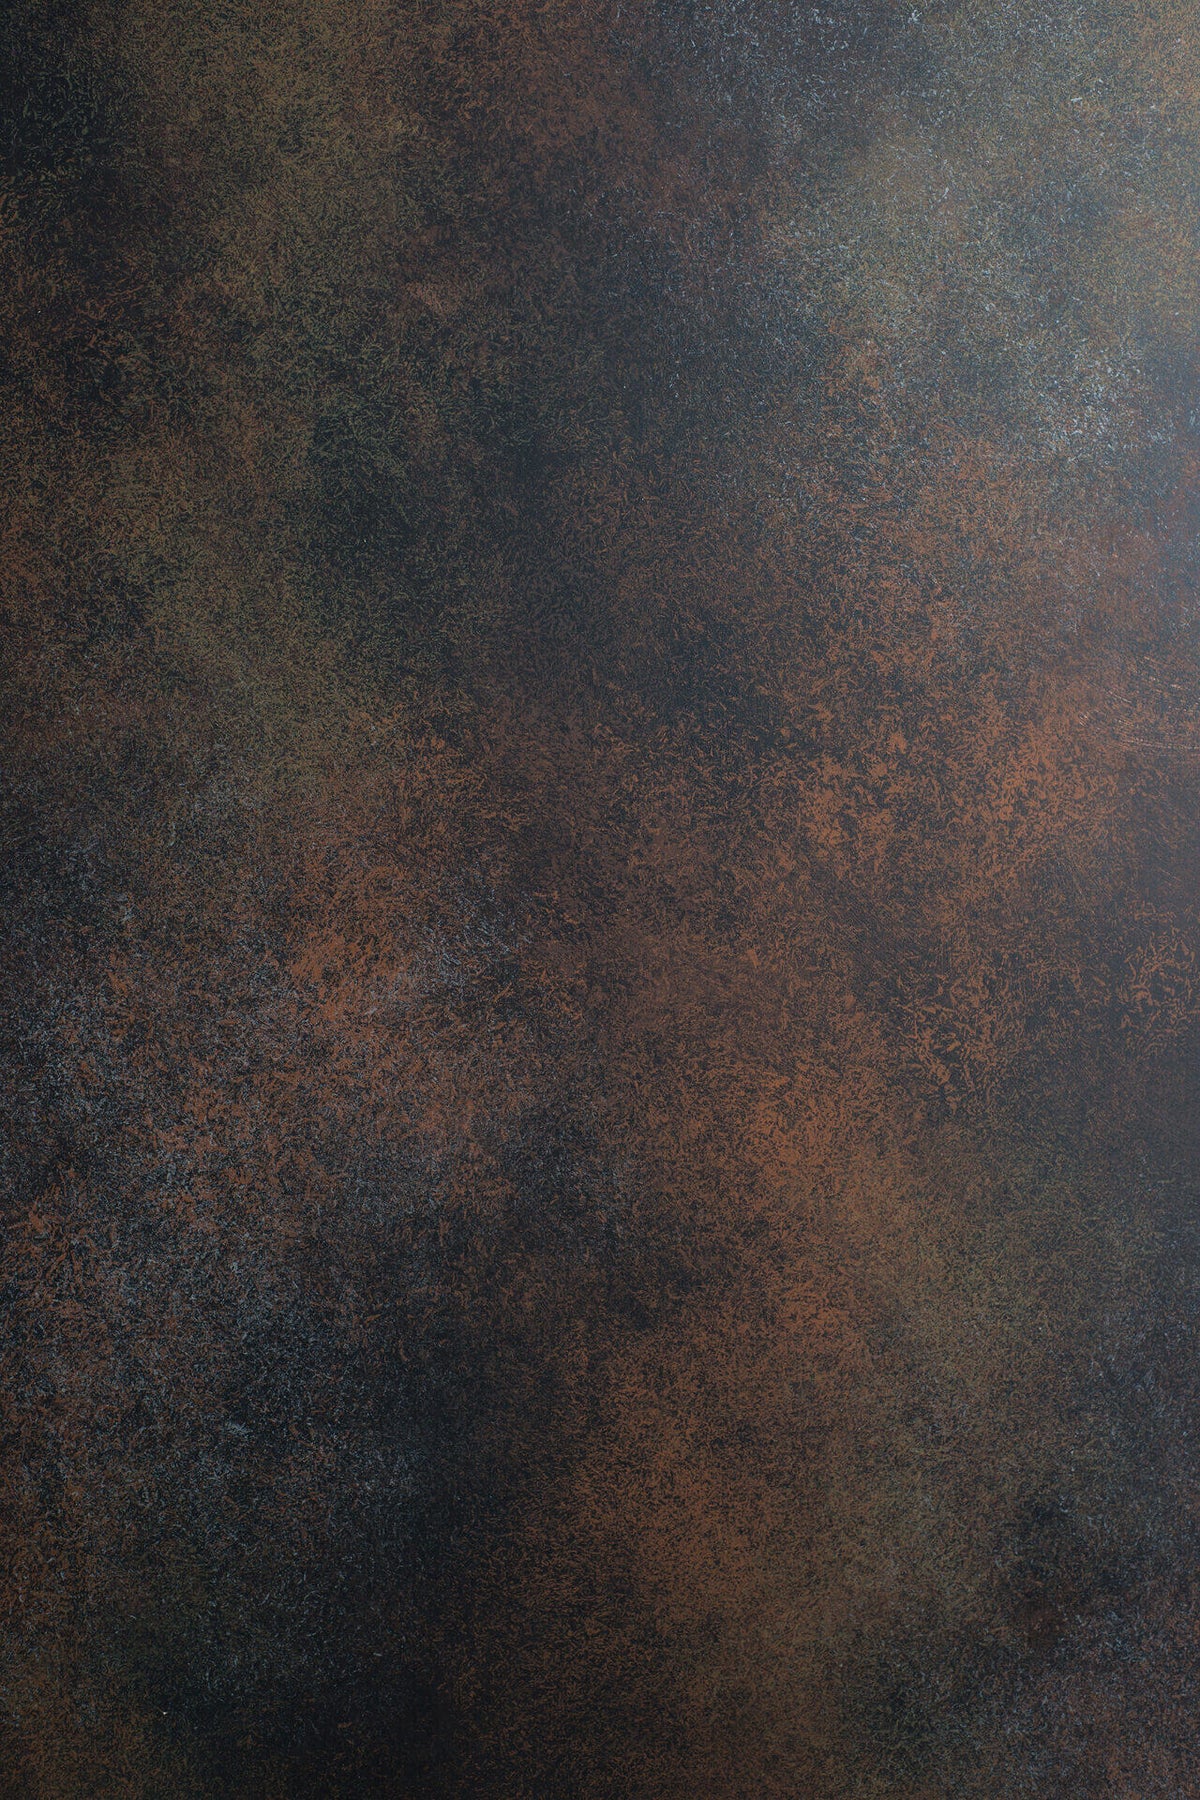 A dark brown product backdrop with small specks